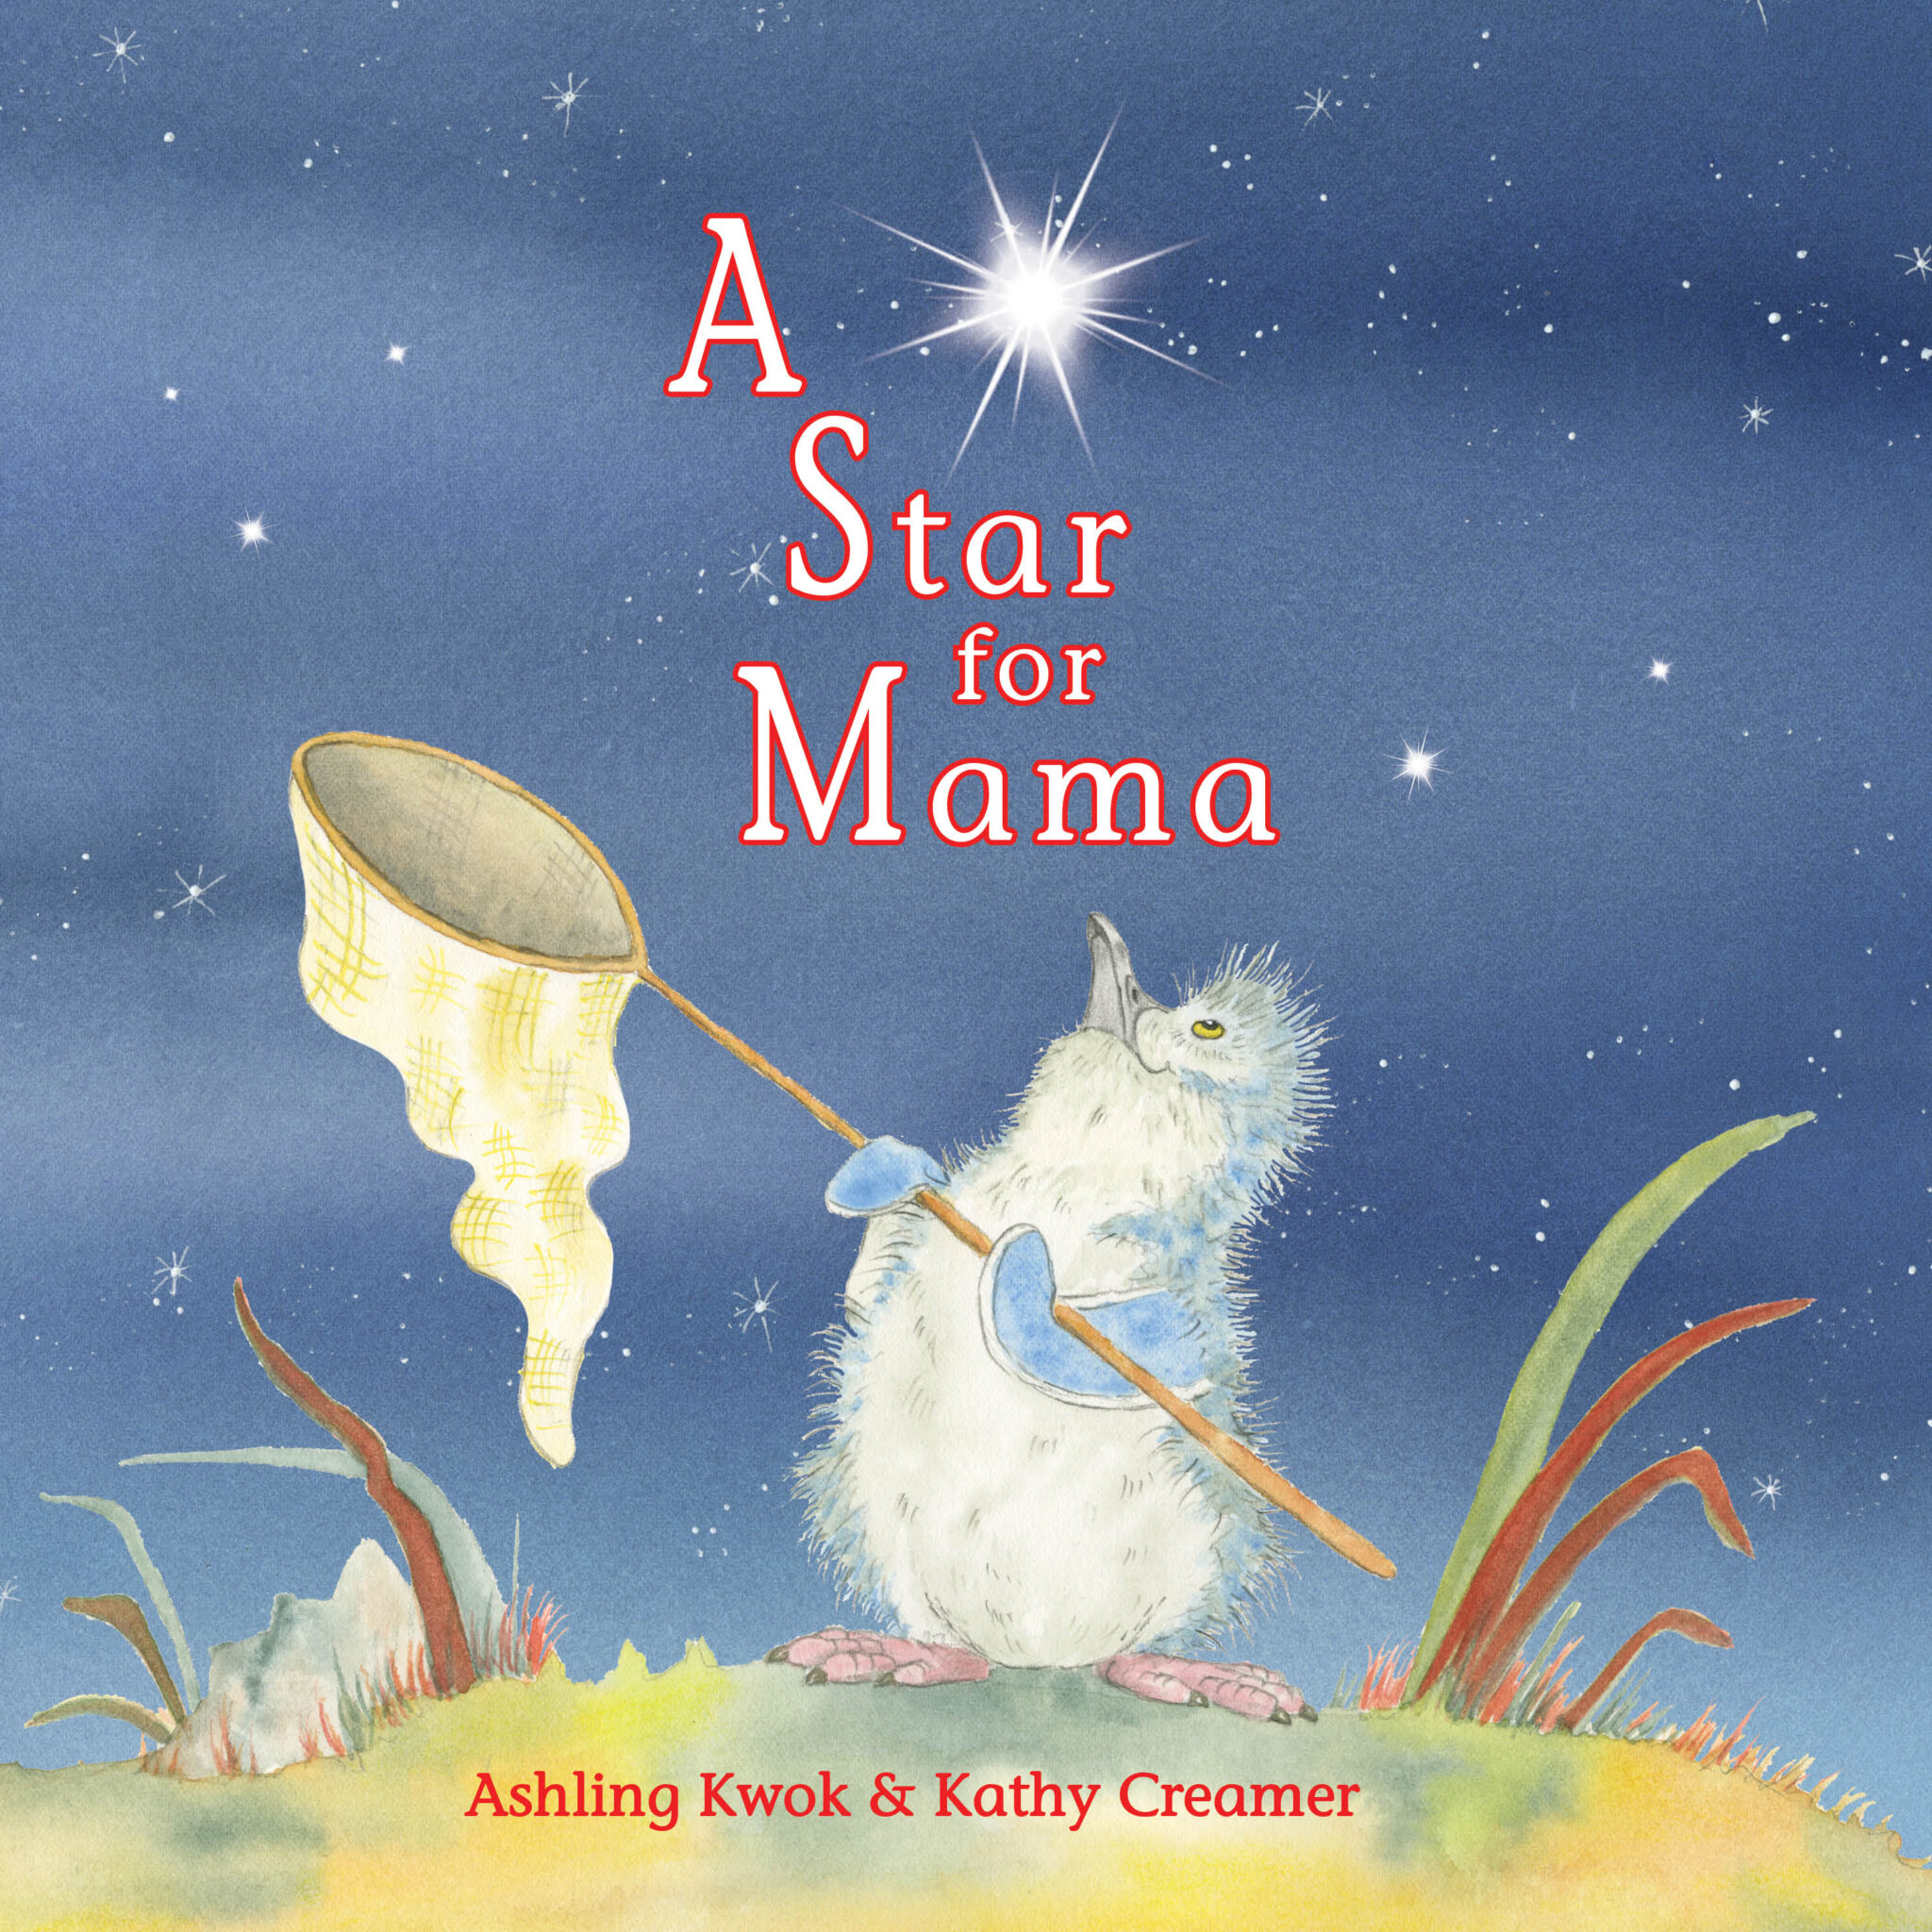 A Star for Mama